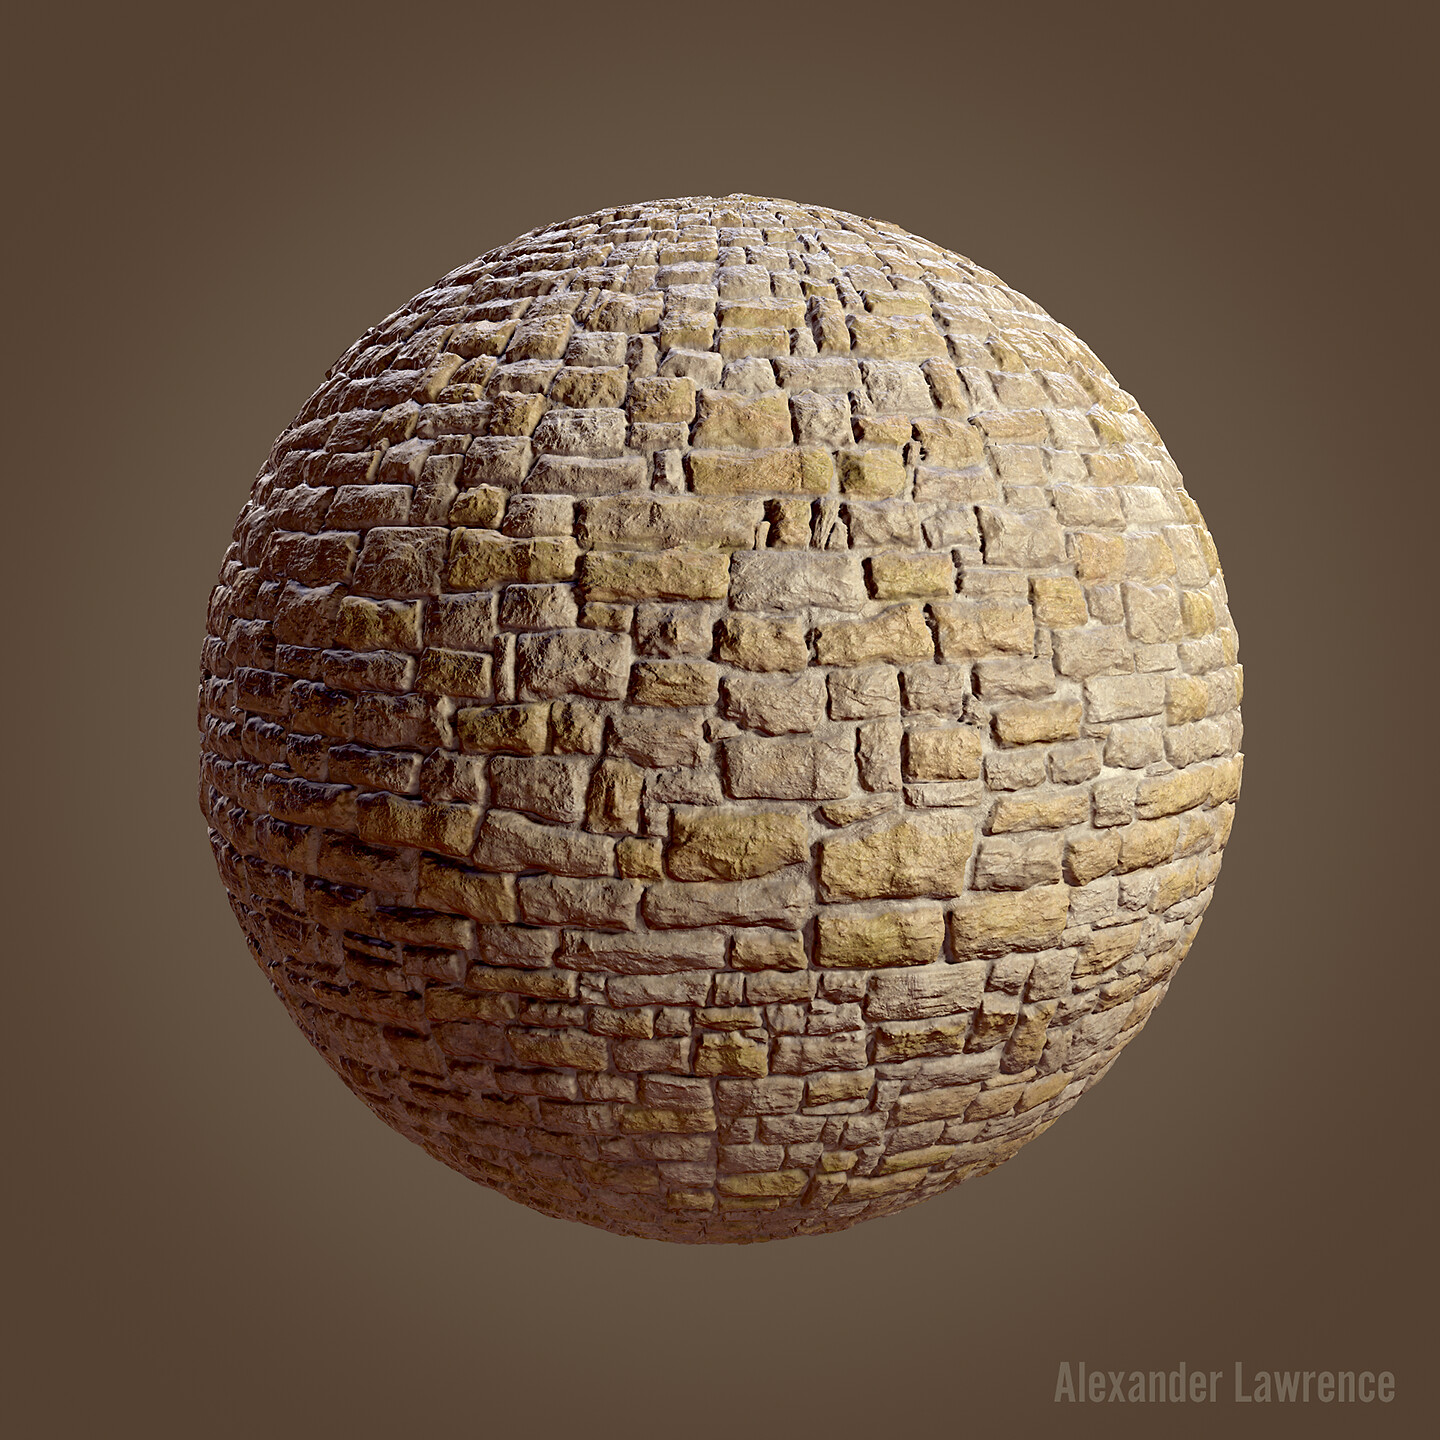 Another wall material, this time of stones of mixed sizes. Shown here is an alternative version of the albedo, which has more color to it than the primary version. Using masks, I mix between the two versions in-engine for medium-scale variation.